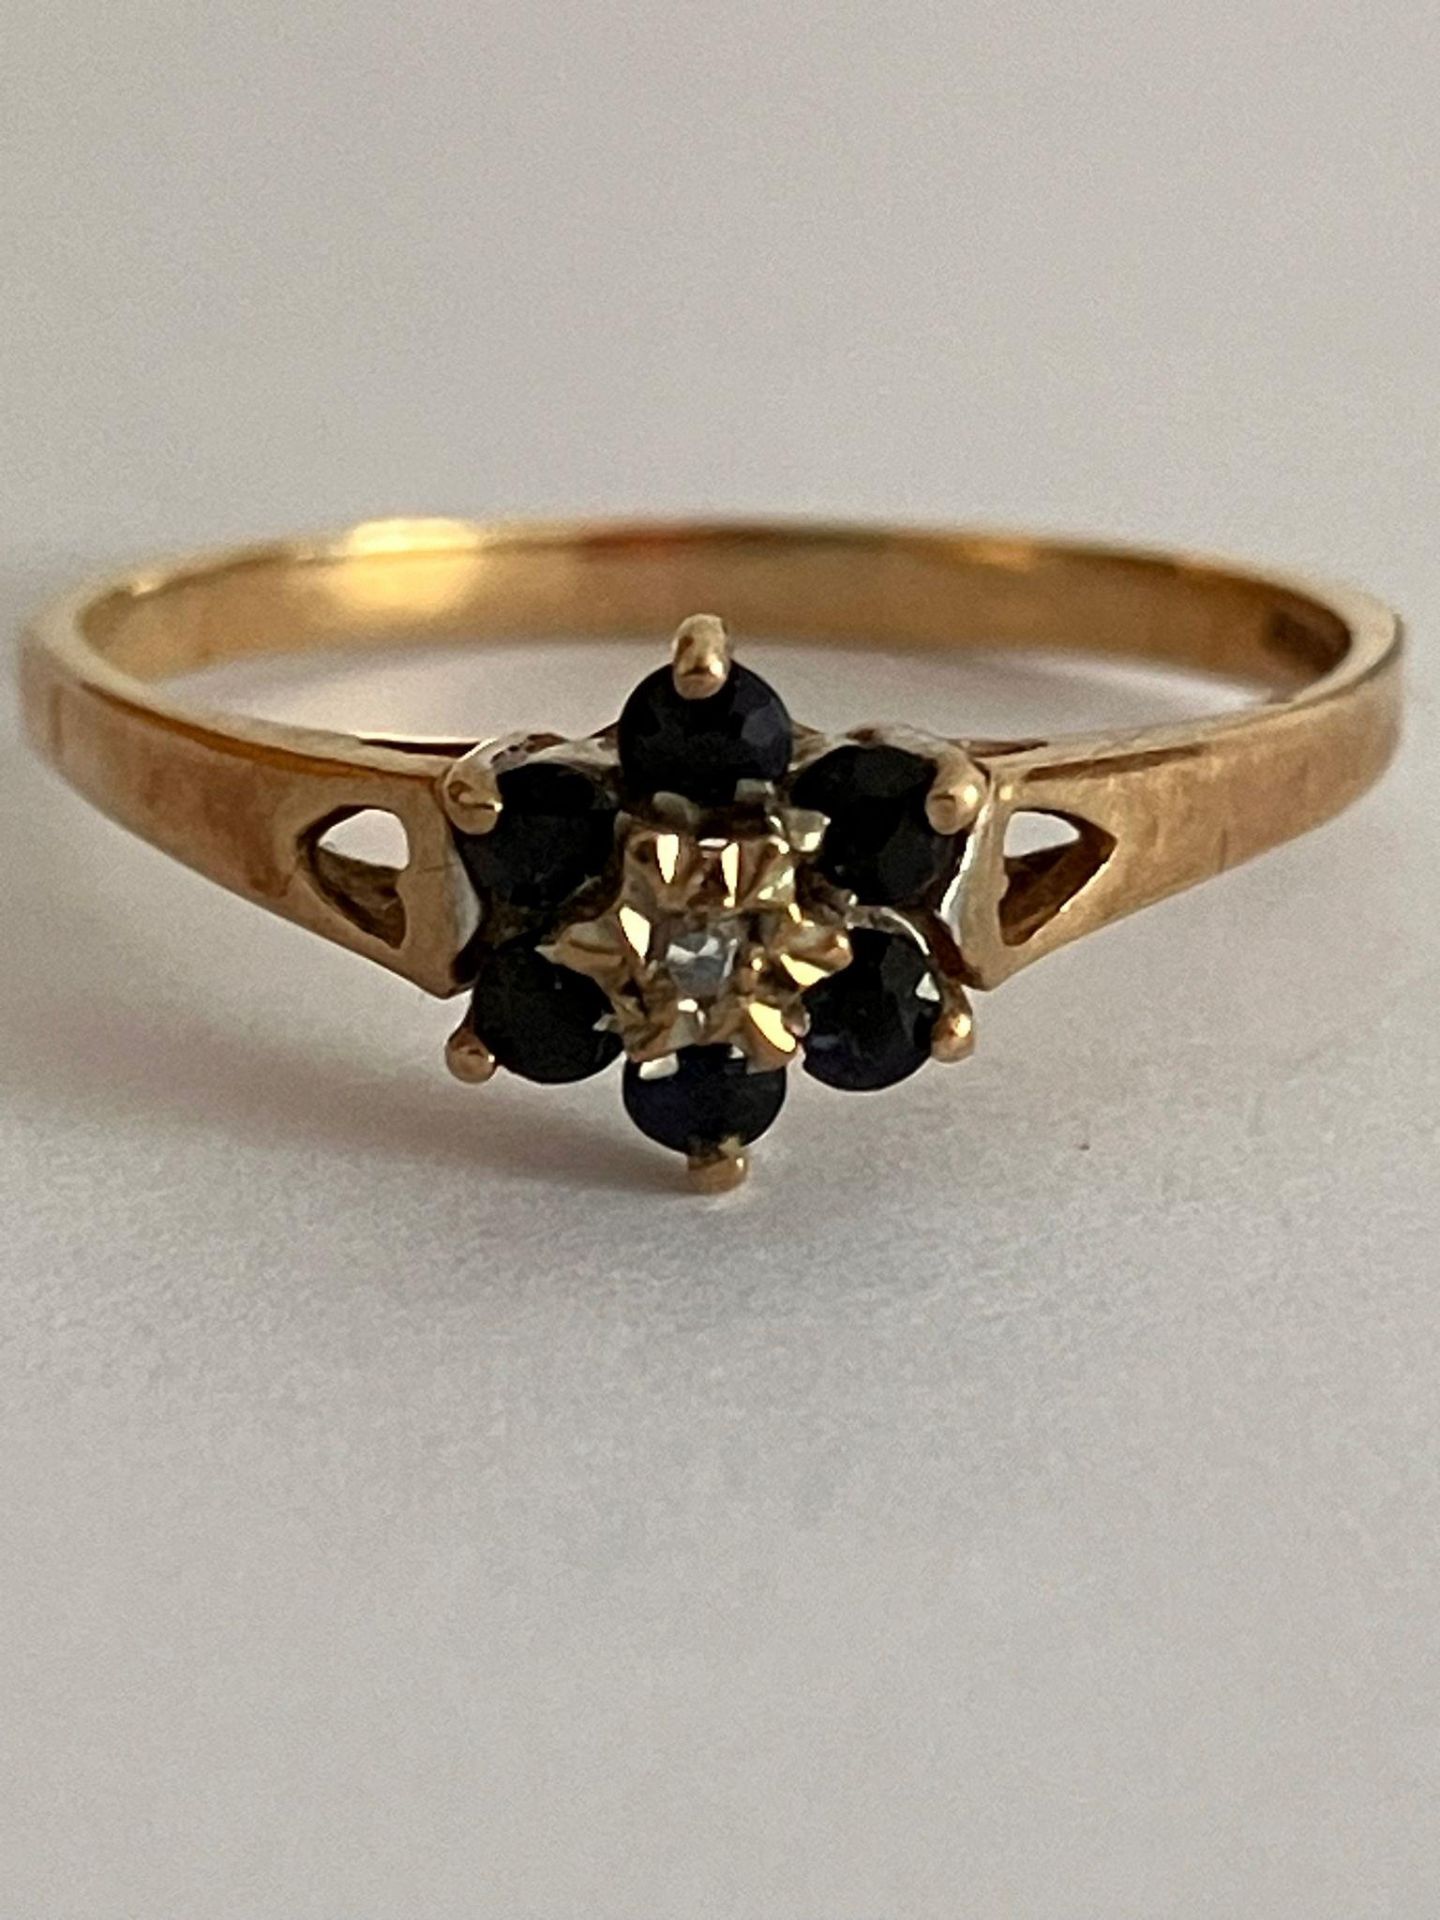 9 carat gold DIAMOND and SAPPHIRE RING. Full UK hallmark. Complete with ring box .1.17 grams. L 1/